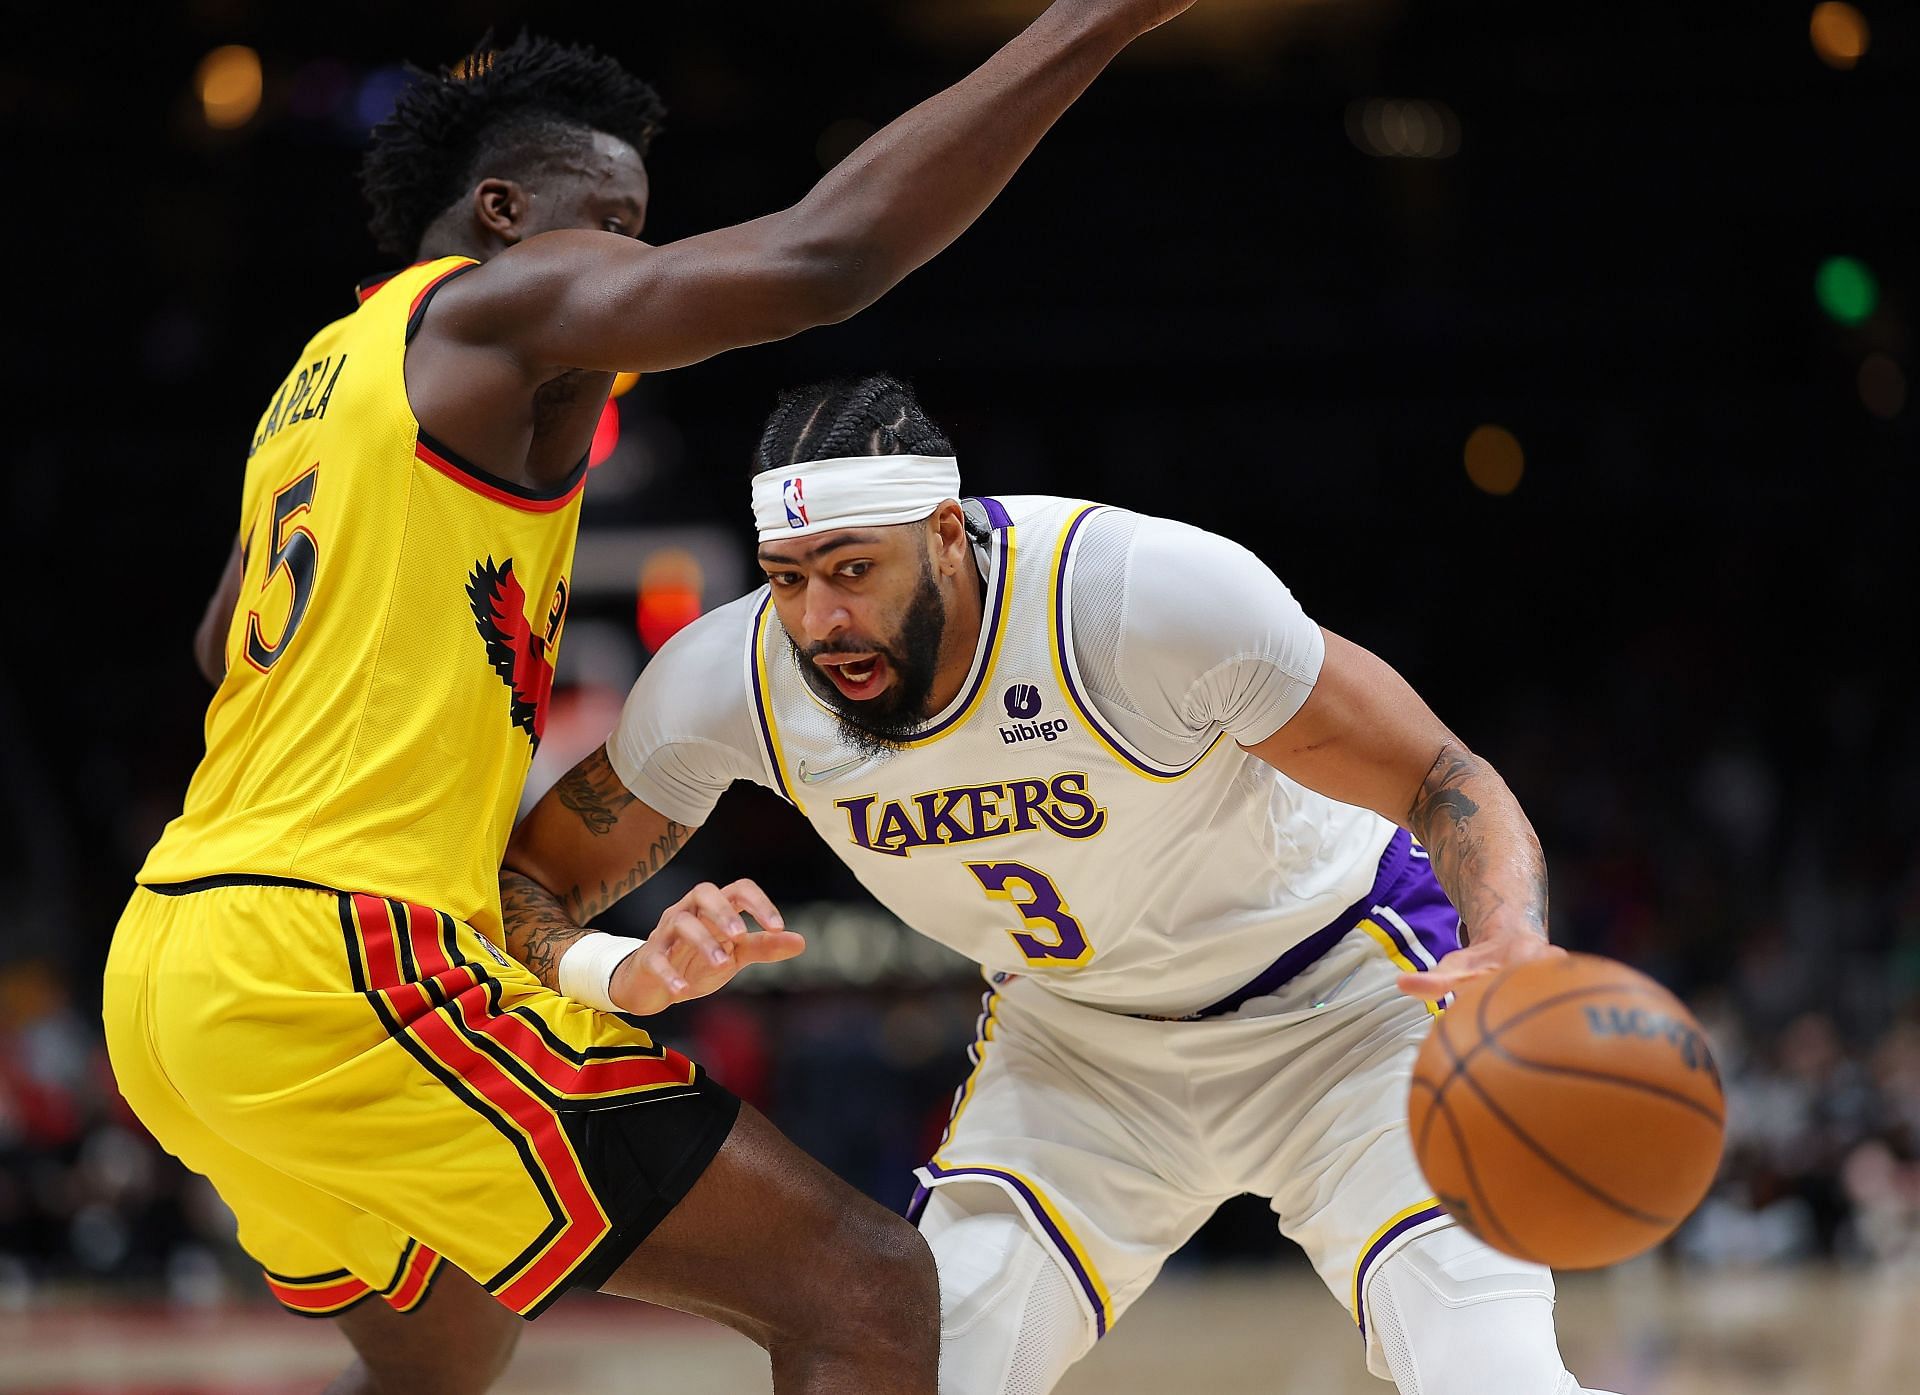 Anthony Davis of the LA Lakers turns over the ball as he is charged with traveling while driving into Clint Capela of the Atlanta Hawks on Jan. 30, 2022, in Atlanta, Georgia.